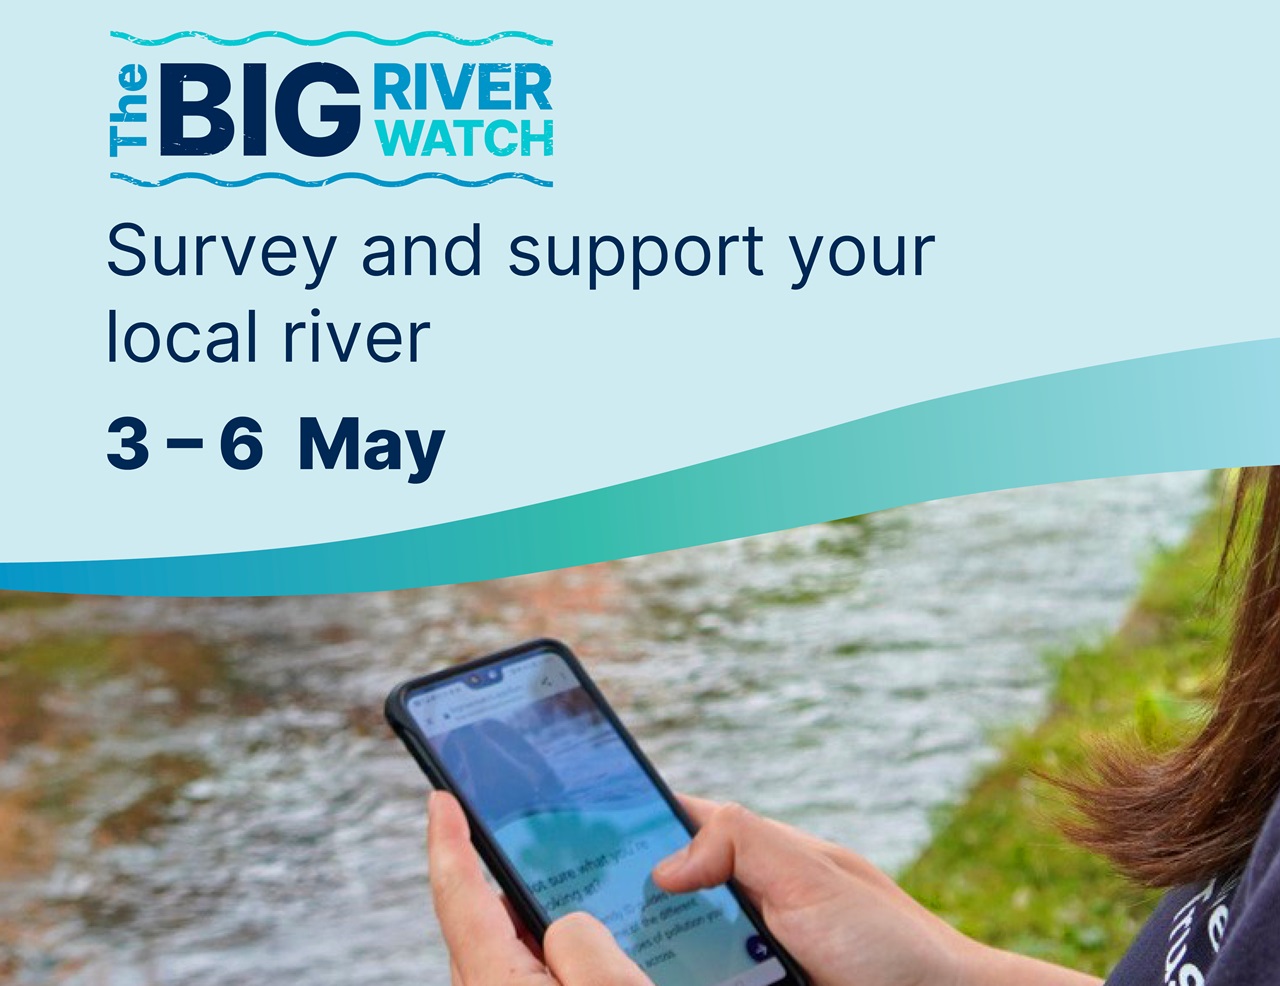 Your river needs YOU this May Bank Holiday weekend